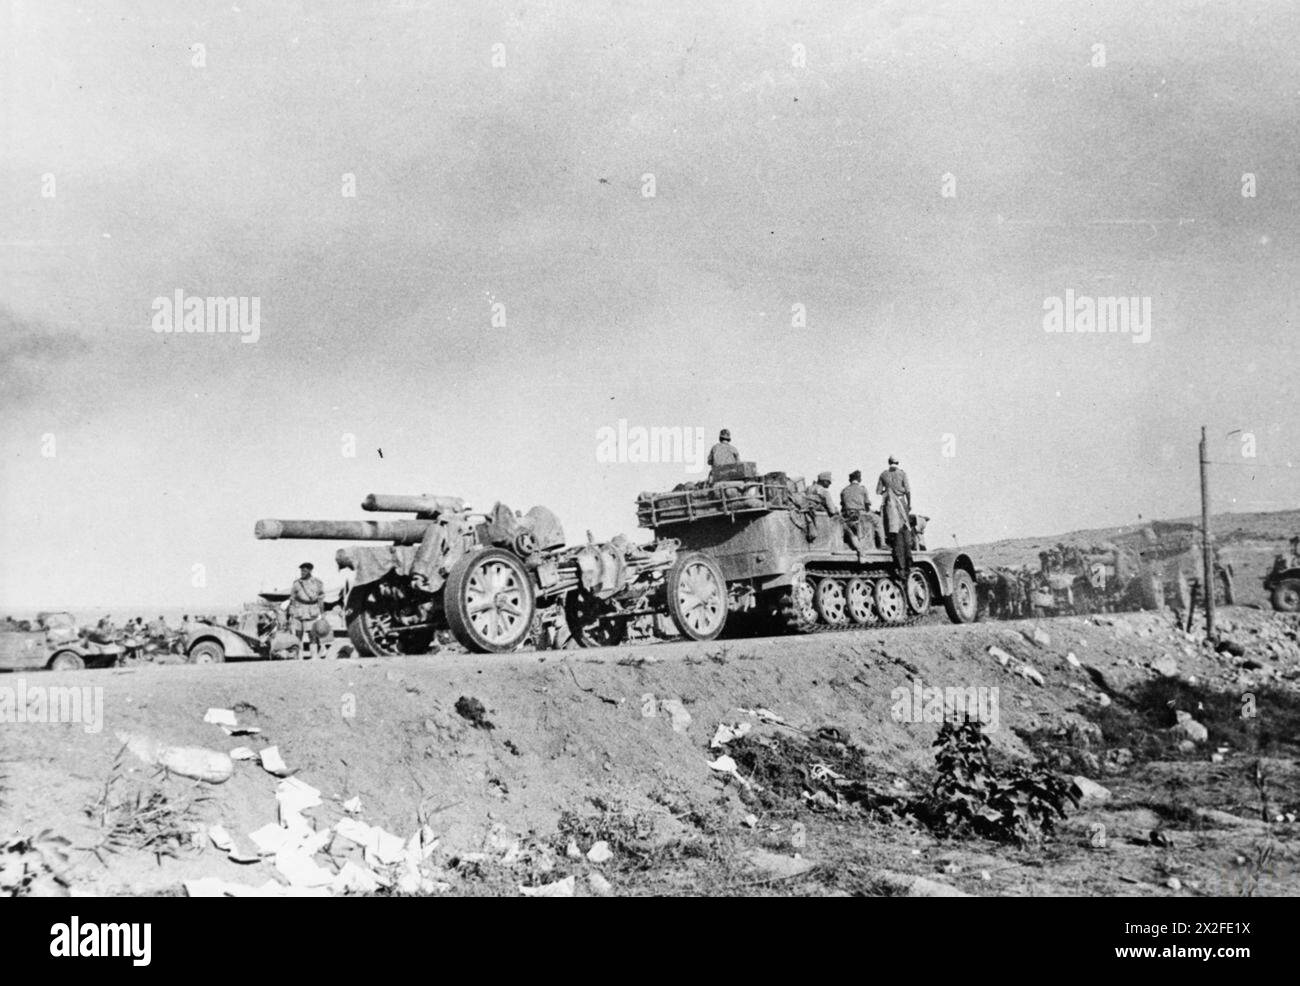 THE FIRST BATTLE OF EL ALAMEIN, JULY 1942 - German 15 cm heavy artillery howitzers being towed by Sd.Kfz. 9 'Famo' half trucks towards El Alamein during the first battle, July 1942 German Army (Third Reich) Stock Photo